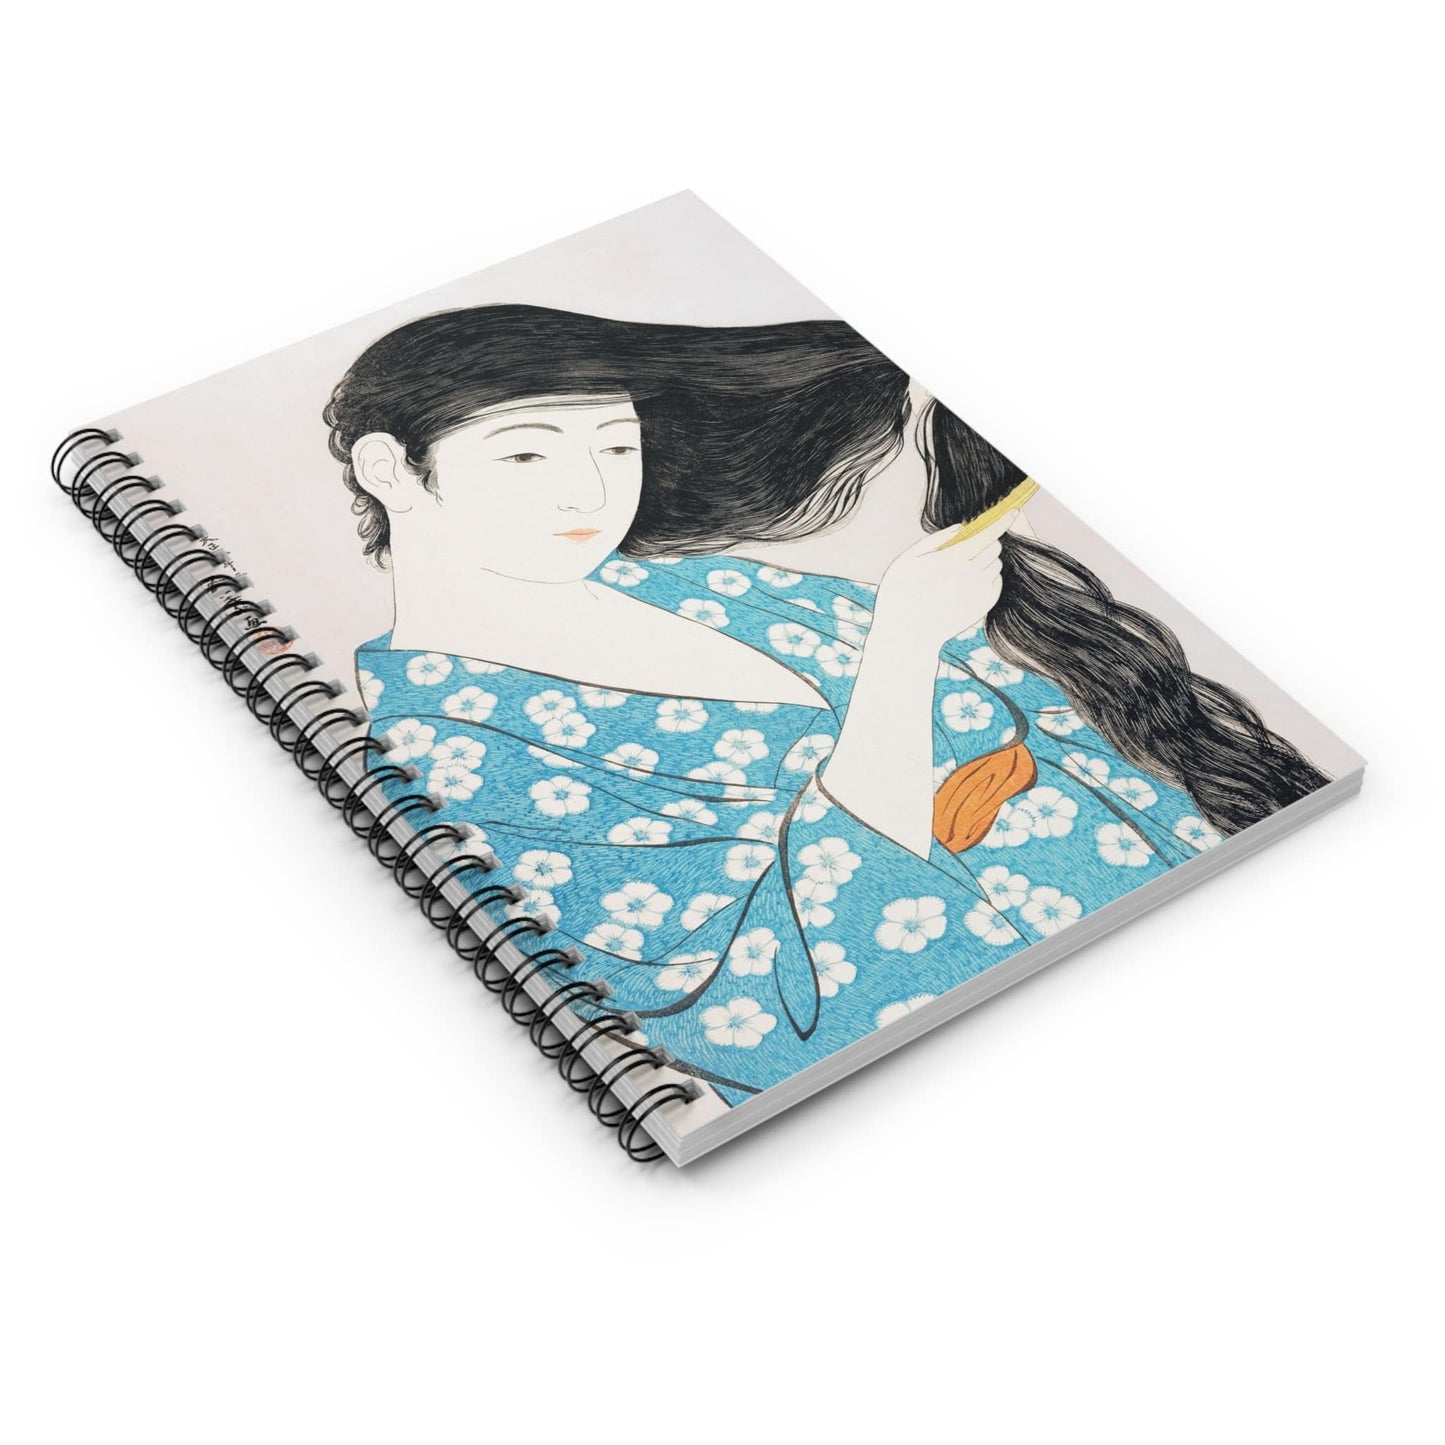 Japanese Spiral Notebook Laying Flat on White Surface